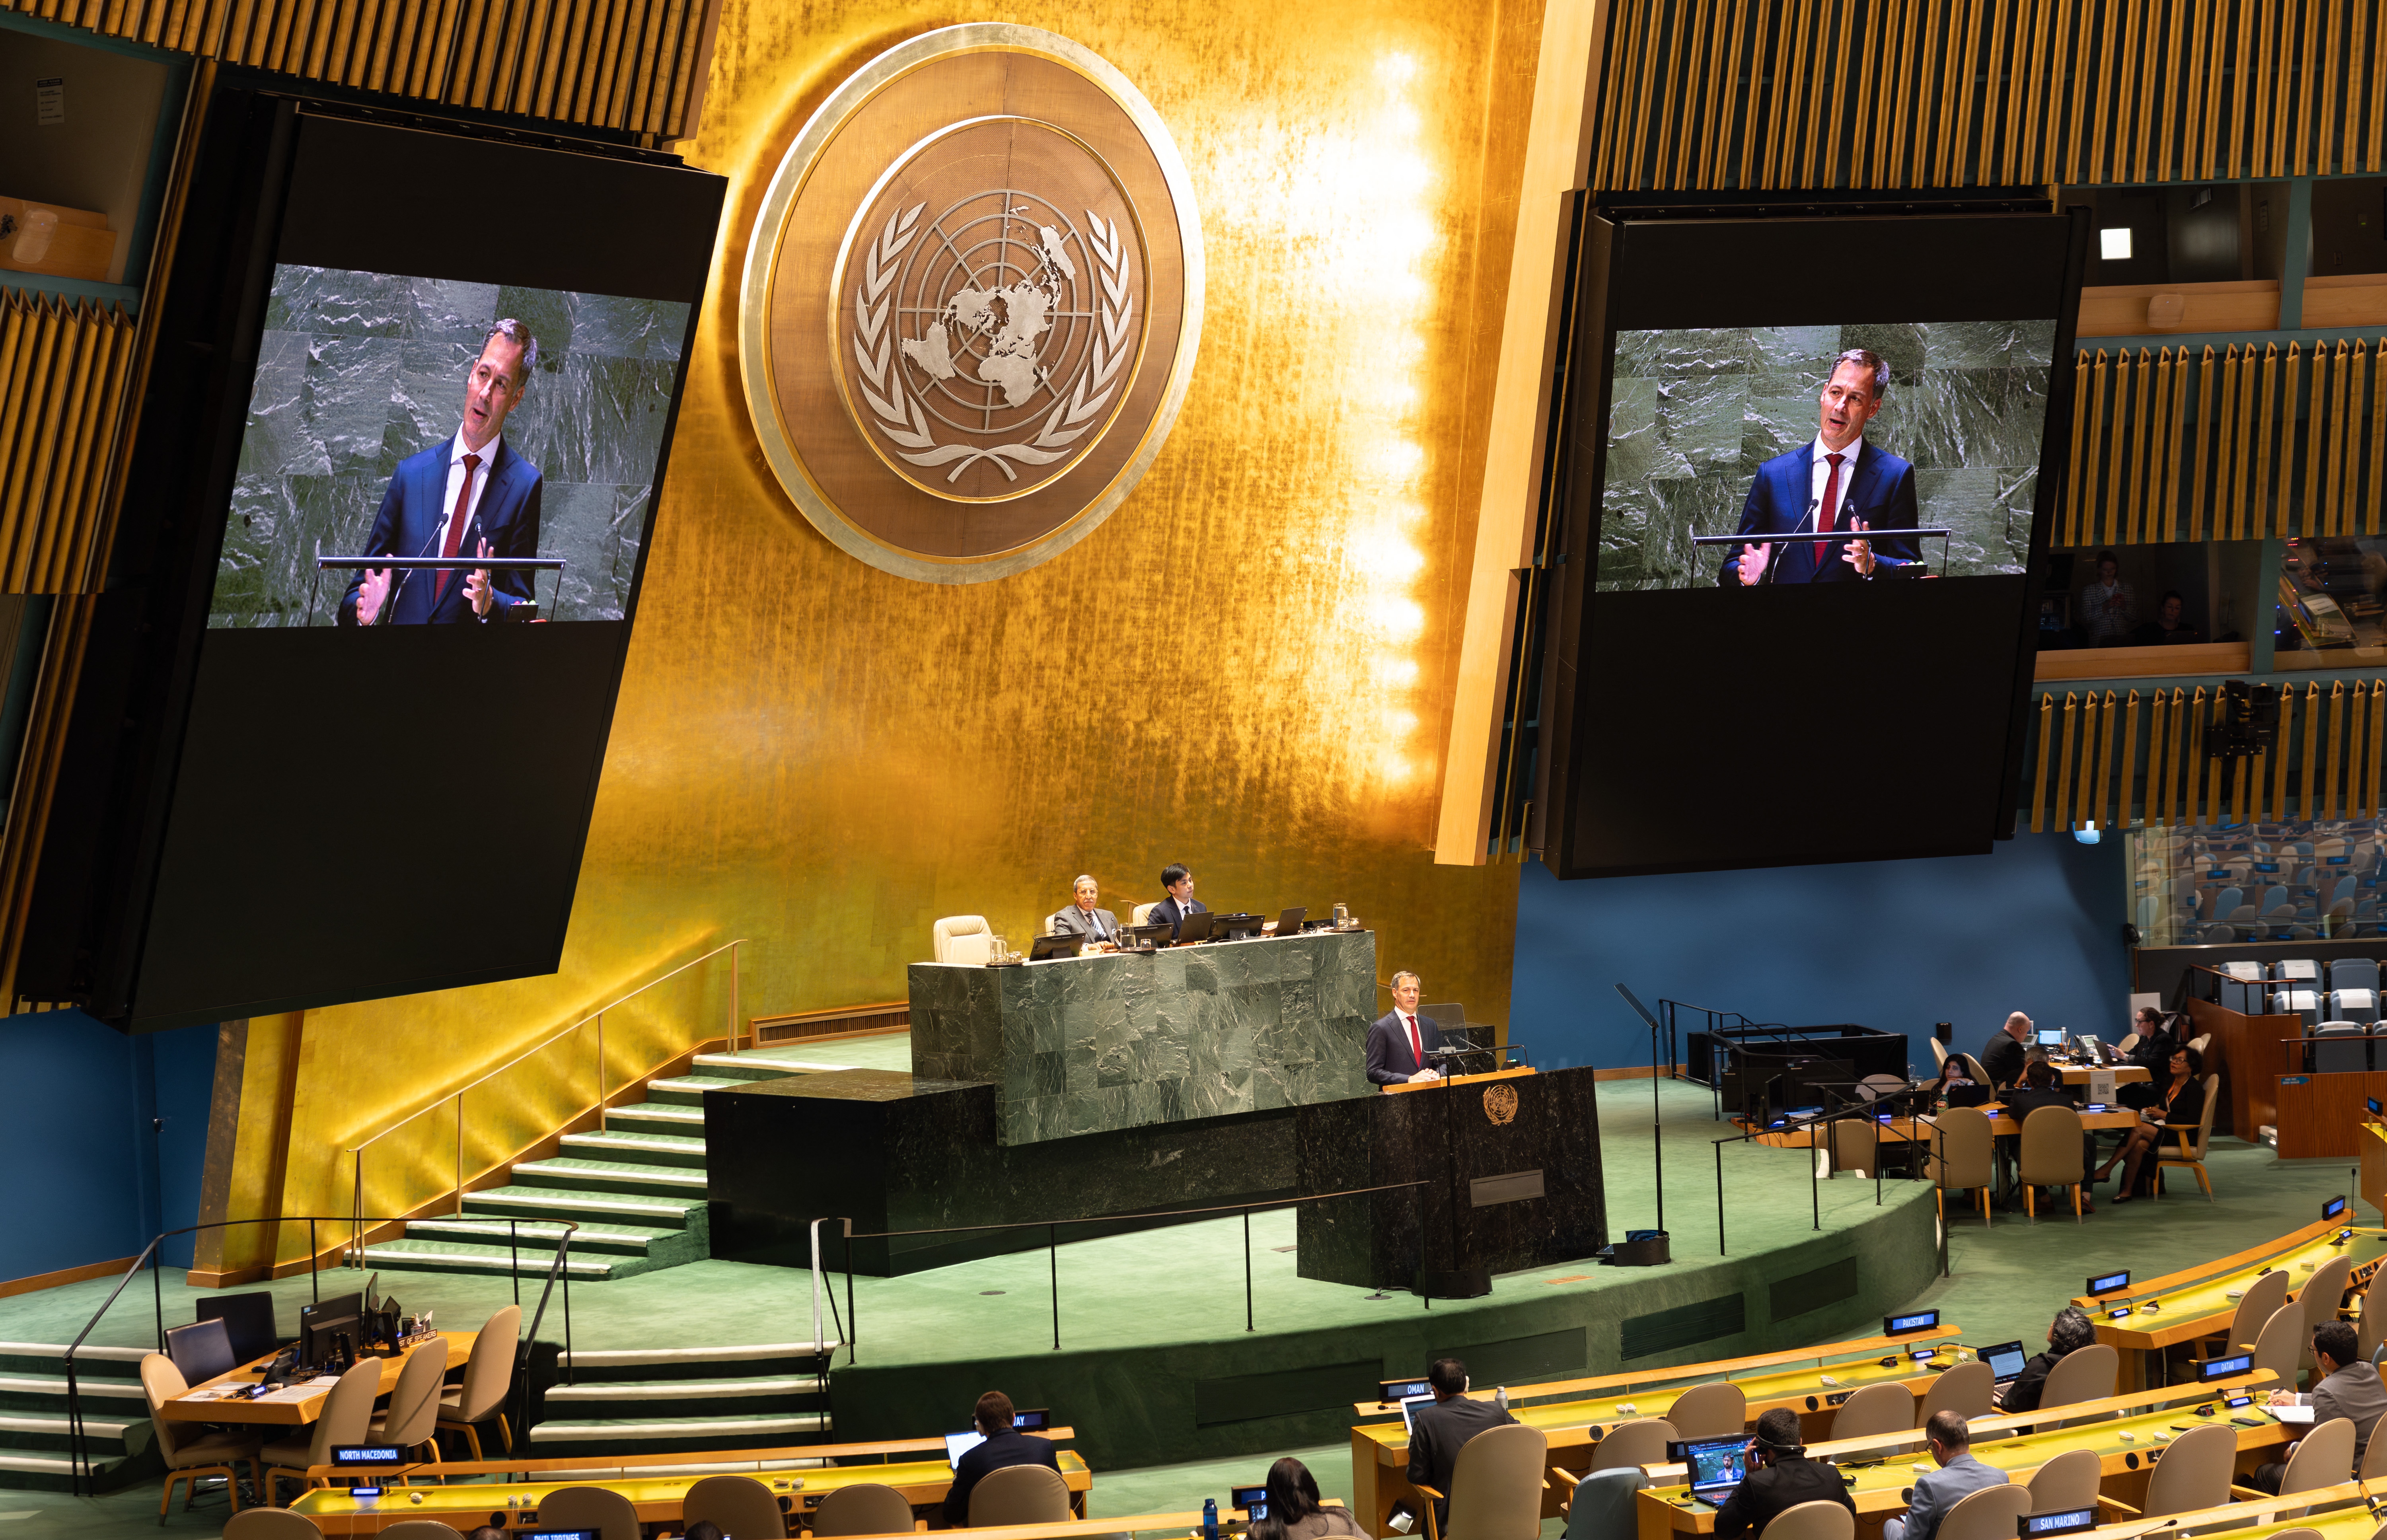 Speaker at UN General Assembly